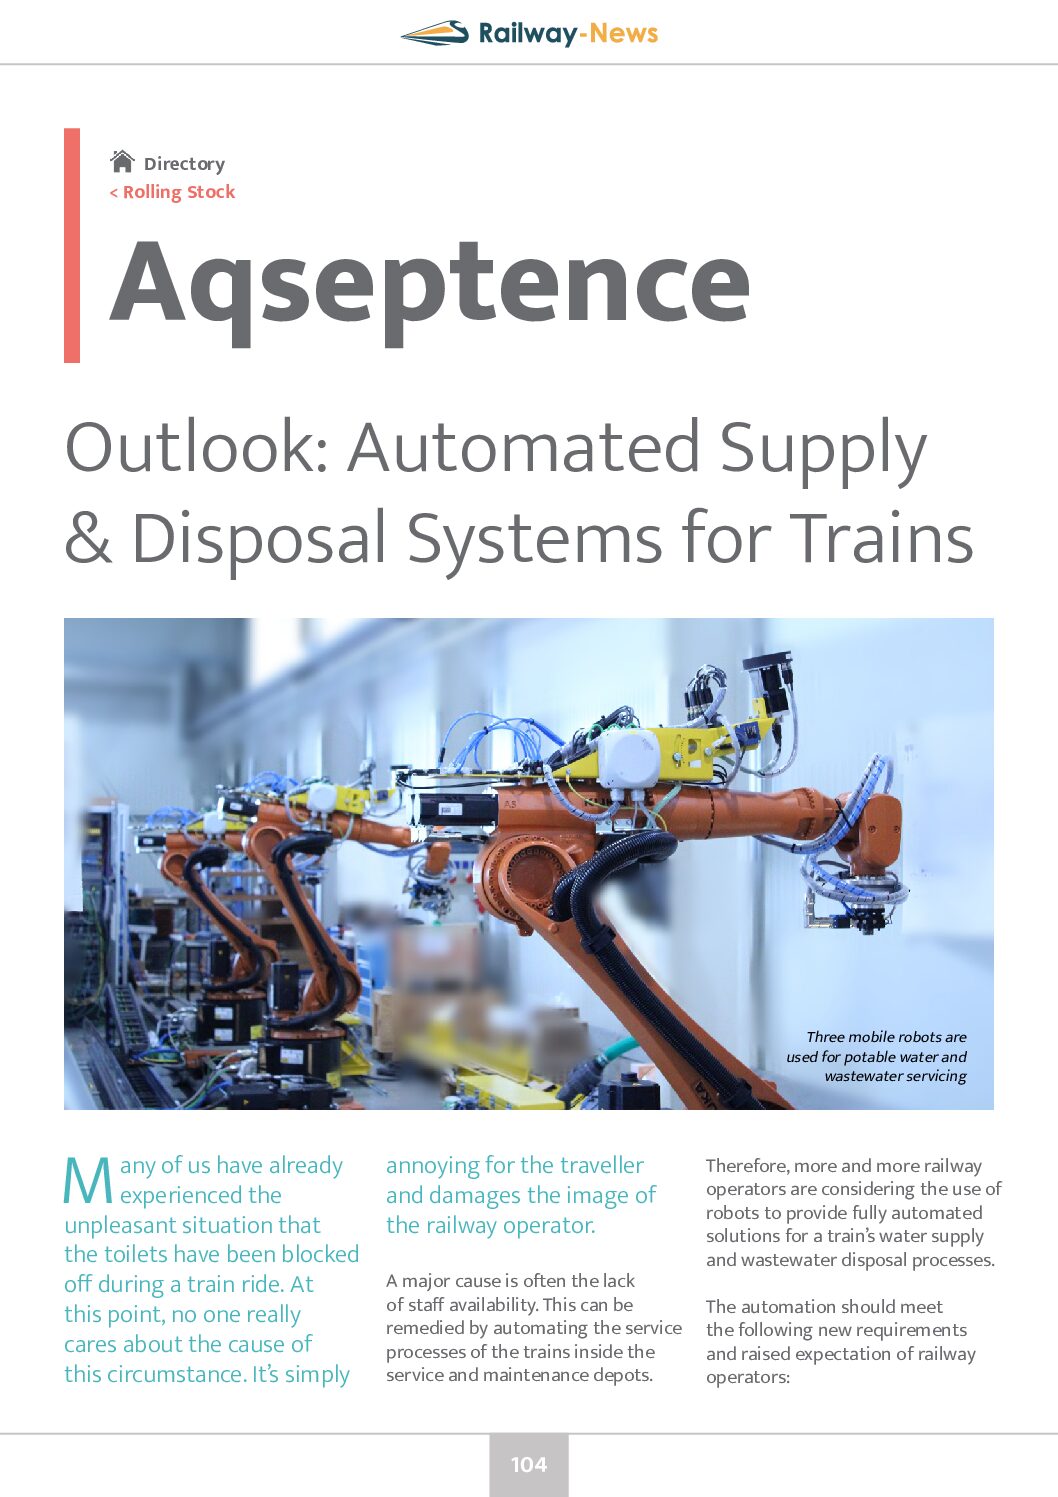 Aqseptence – Outlook: Automated Supply and Disposal Systems for Trains